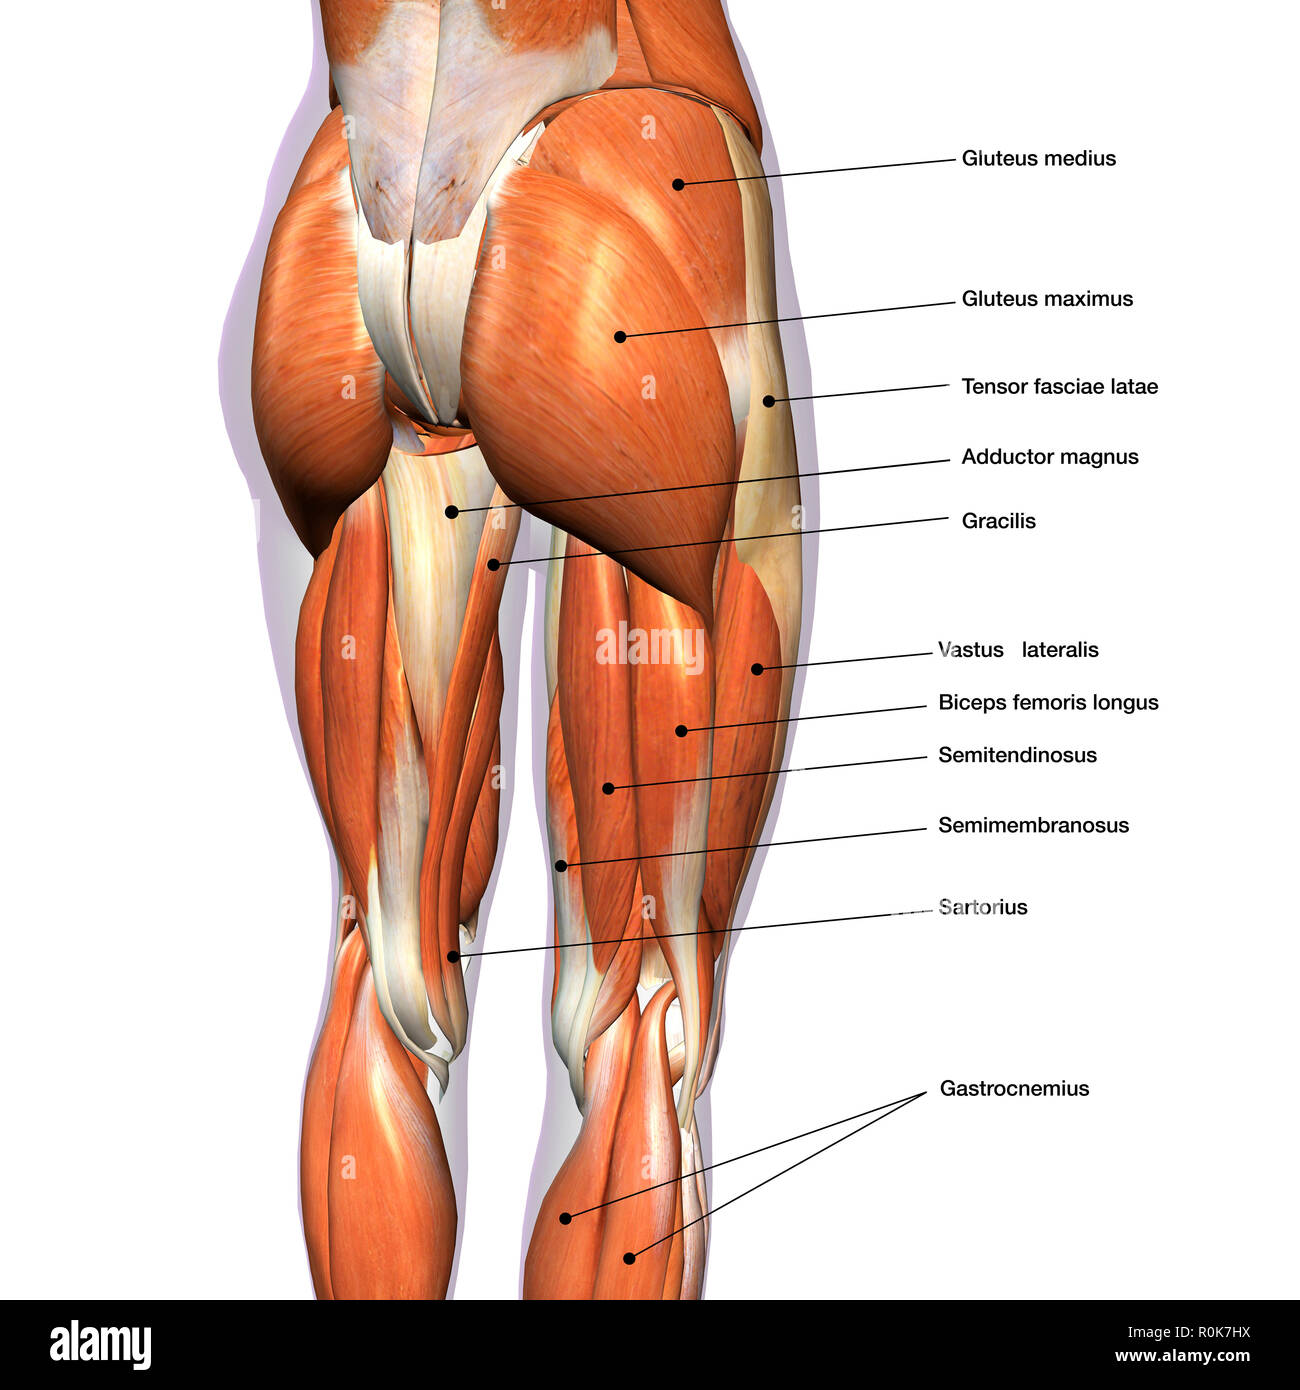 Rear view of female hip and leg muscles, with labels. Stock Photo